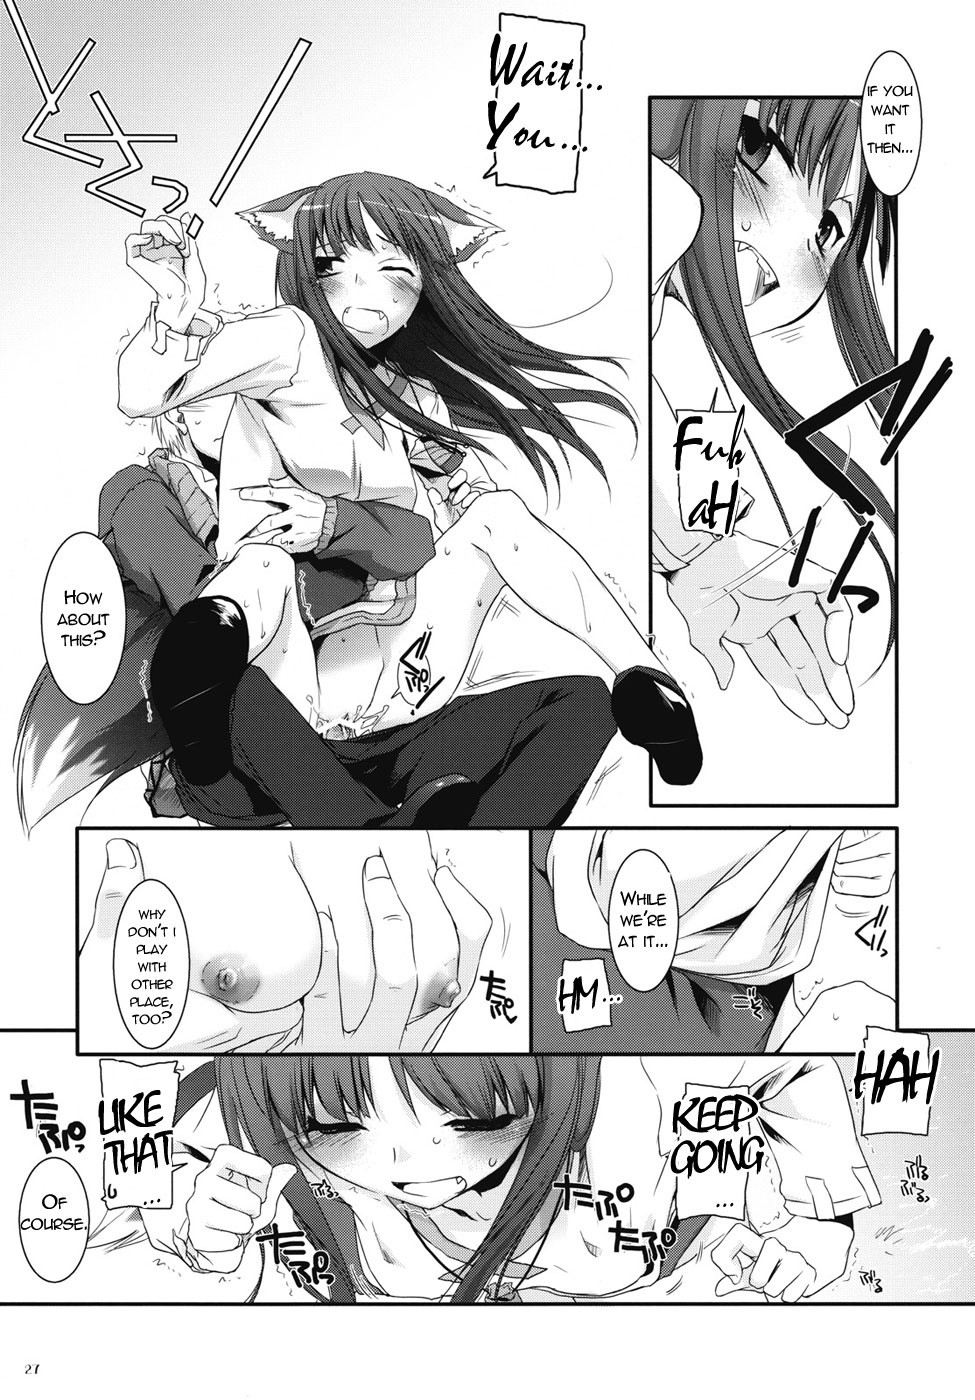 D.L. action 43 hentai manga picture 24